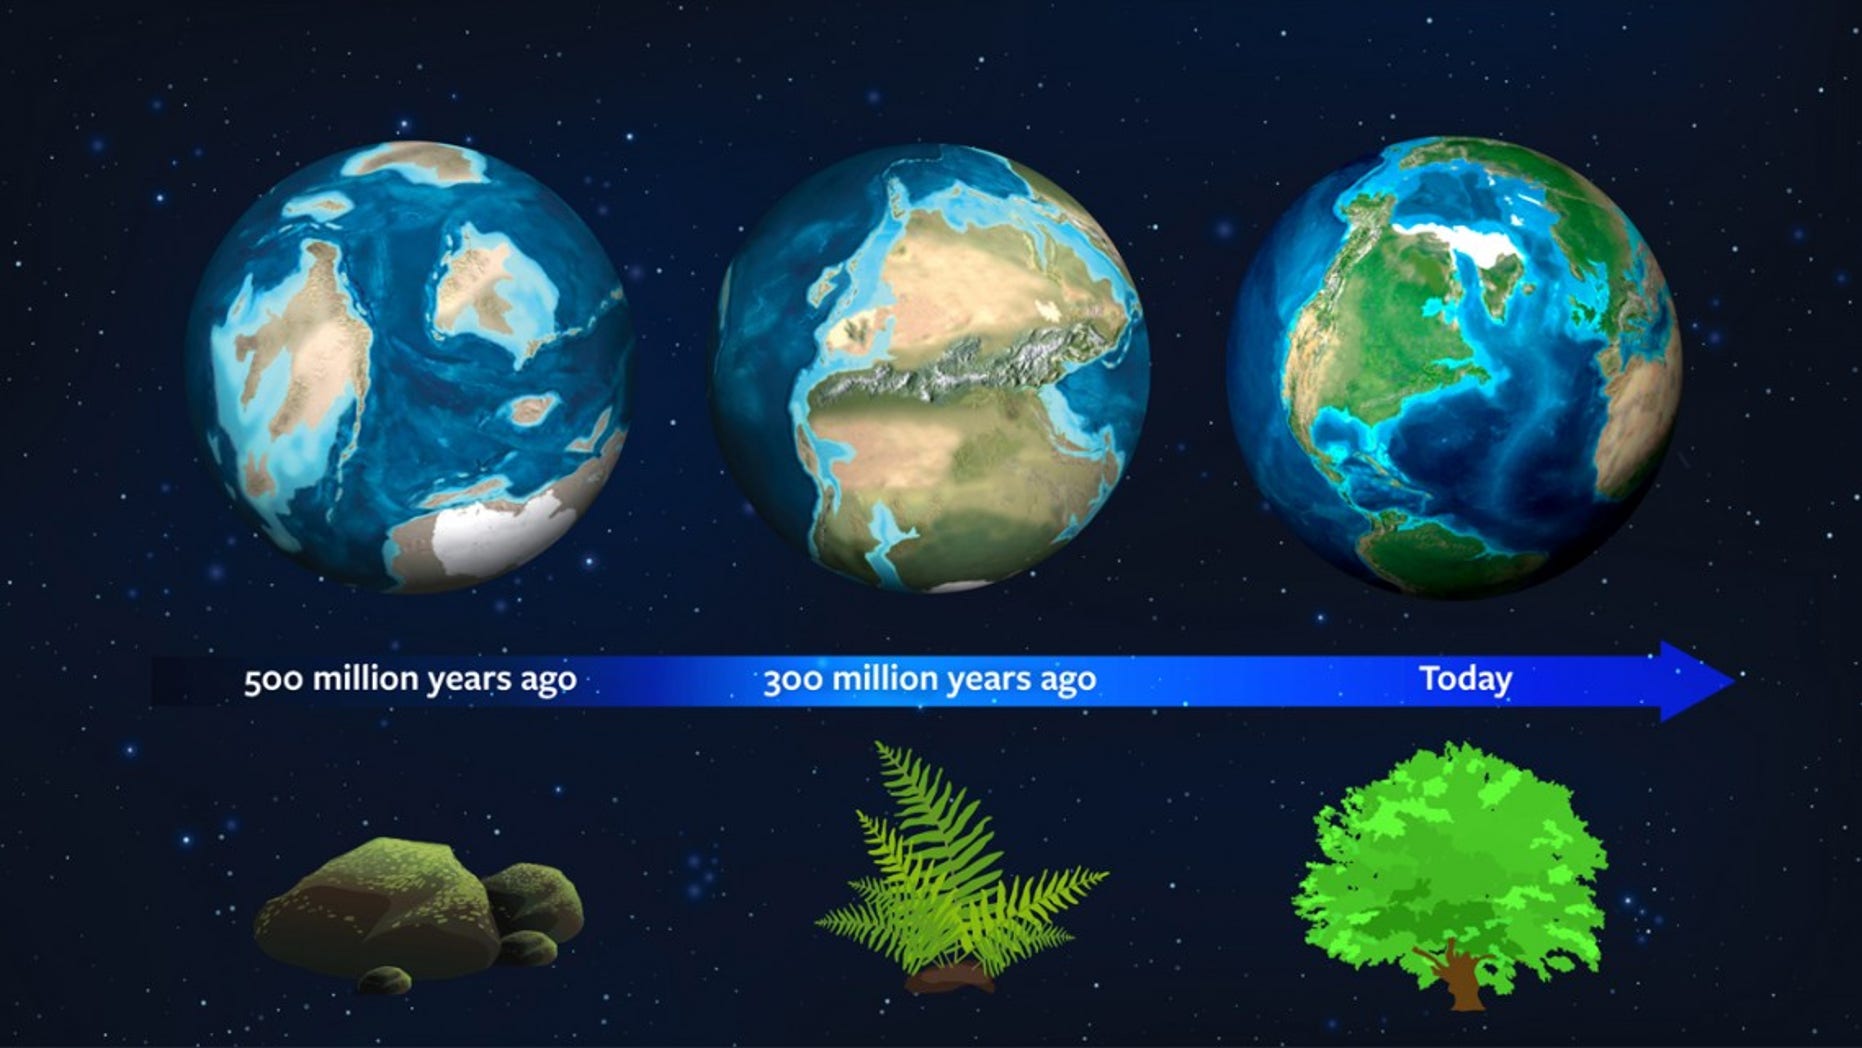 Earth’s natural history may now serve as a guide for astronomers to spot exoplanets. About 500 million years ago, this planet had a different light signature due to the dominance of moss. About 300 million years ago, ferns dominated and mature plant forms rule today - strengthening our planet’s light signature (Jack O'Malley-James/Wendy Kenigsberg/Brand Communications).